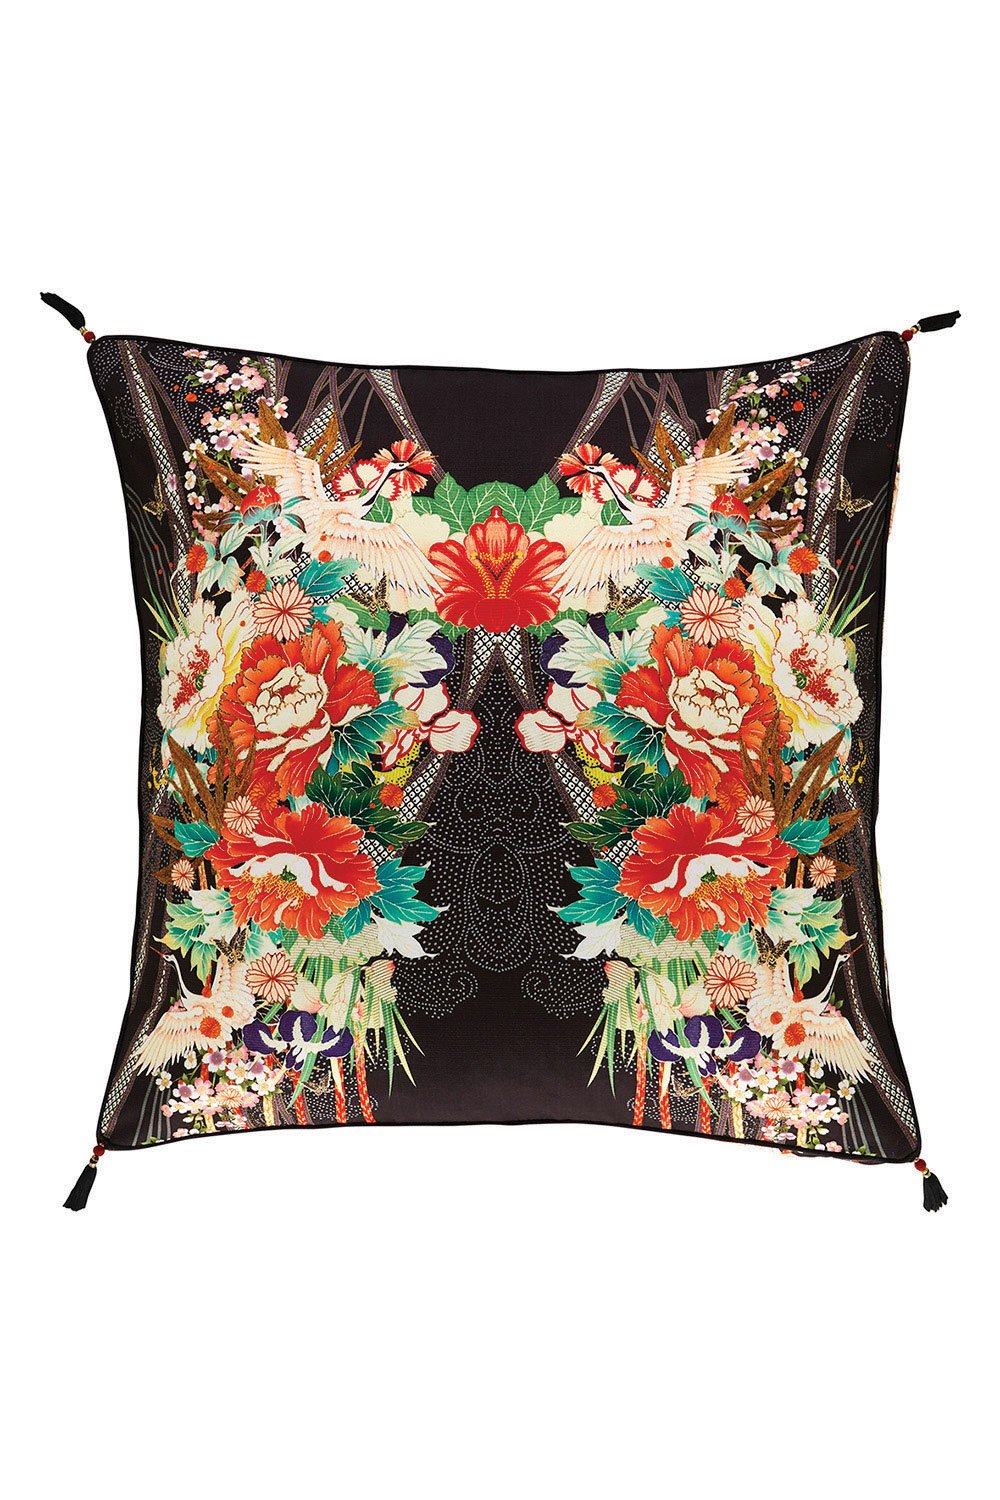 CAMILLA QUEEN OF KINGS LARGE FLOOR CUSHION